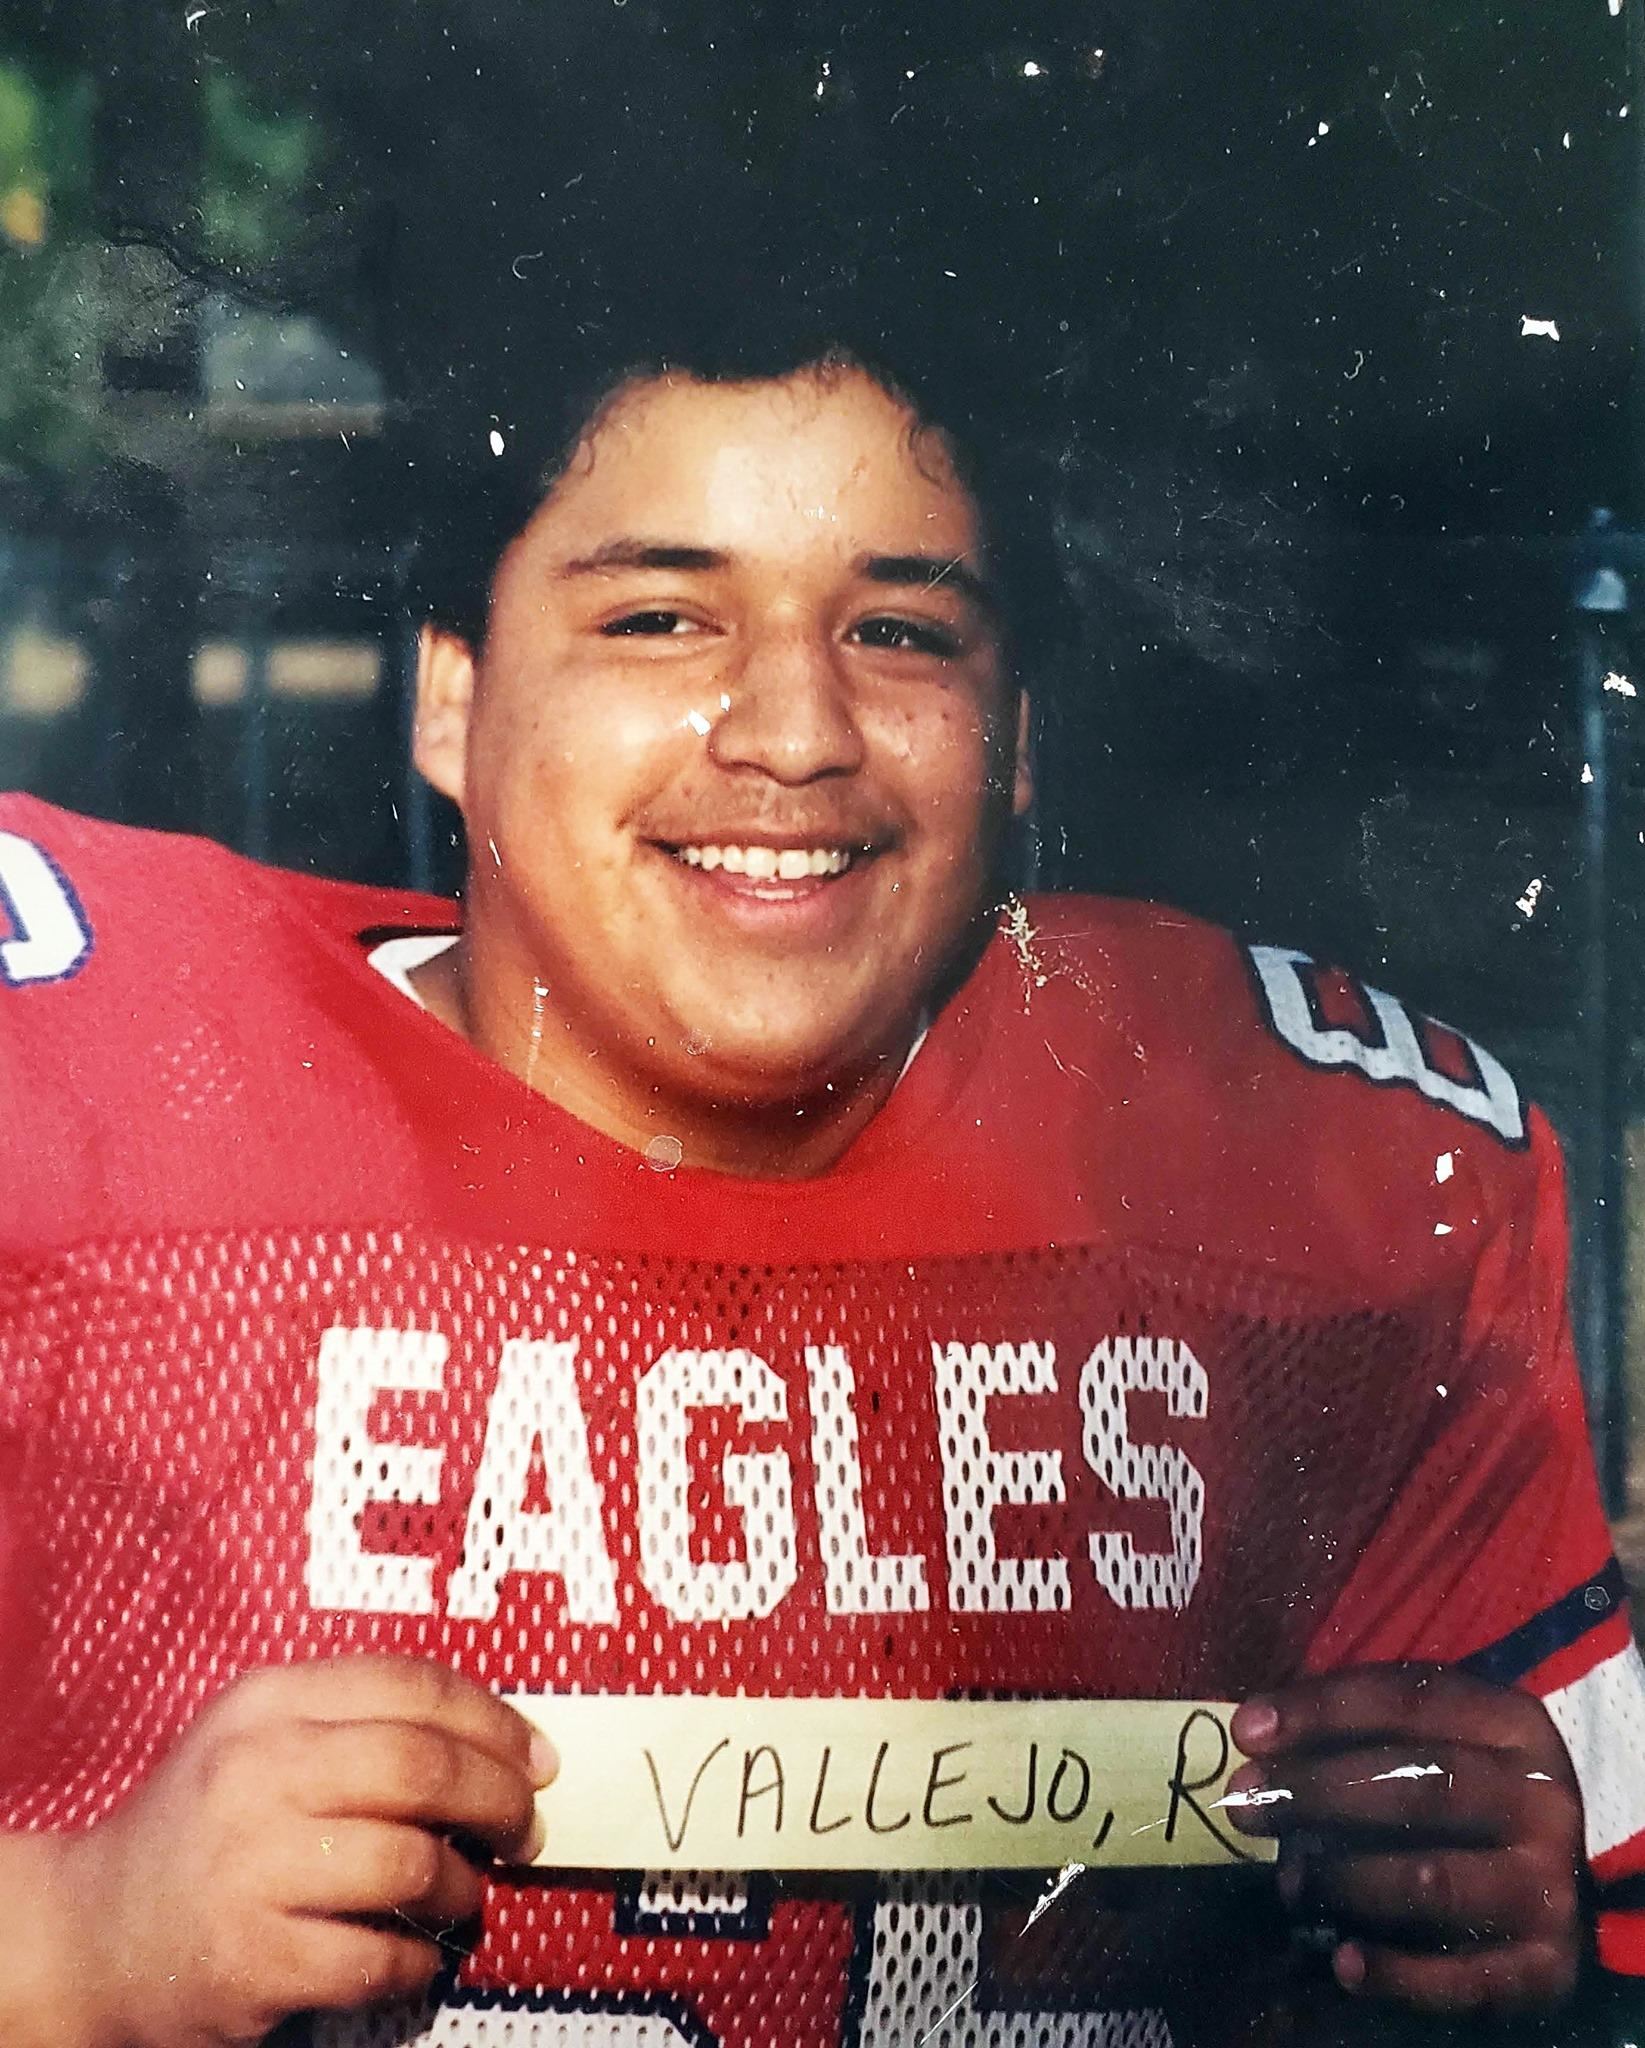 Ralph Vallejo as a football player